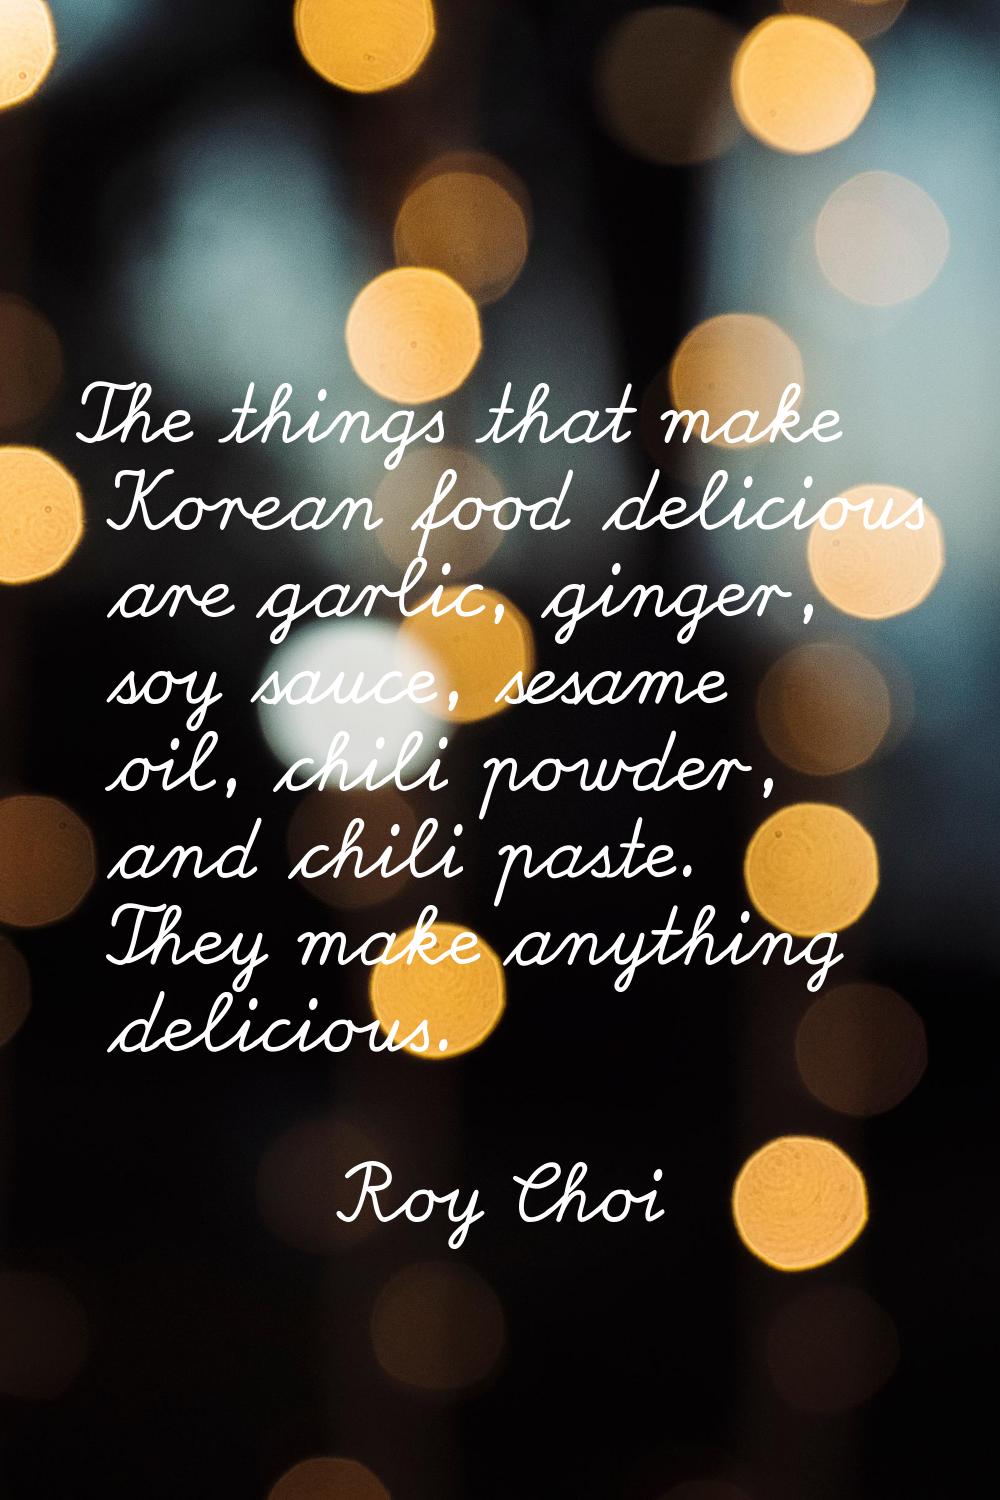 The things that make Korean food delicious are garlic, ginger, soy sauce, sesame oil, chili powder,